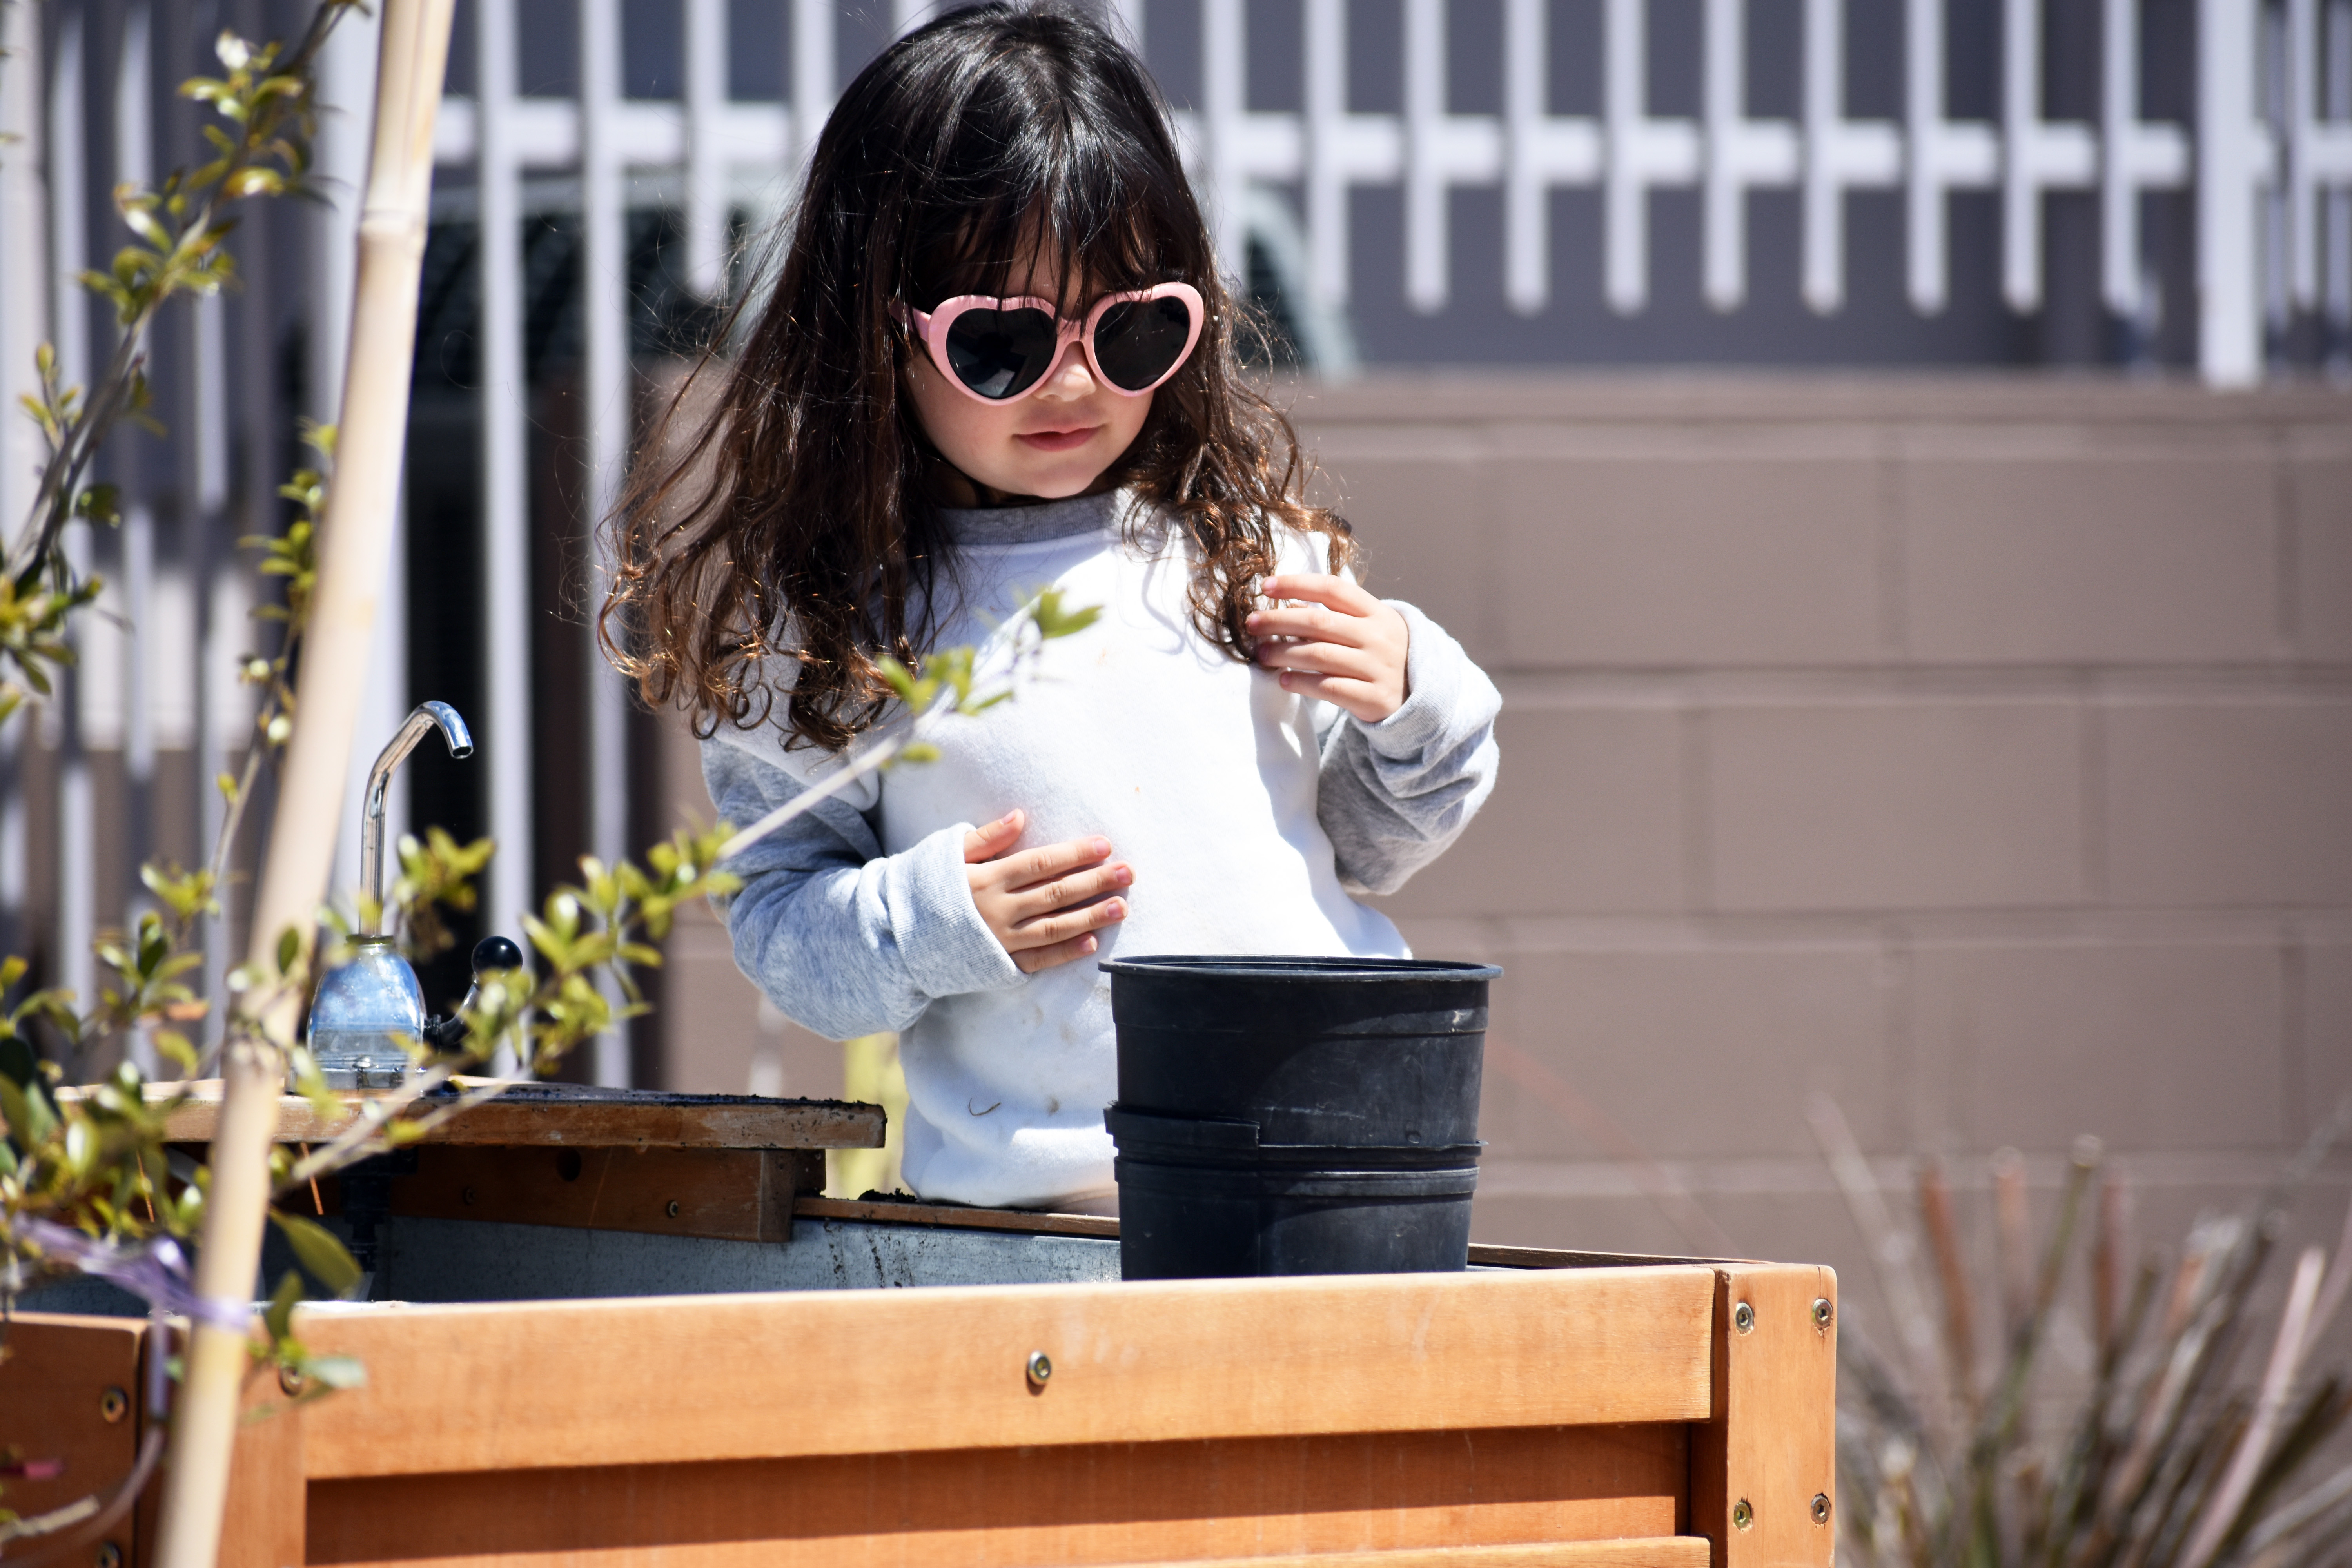 A young girl with long dark hair, pink heart-shaped sunglasses, and a light gray sweater stands by a wooden planter box, holding a small black pot.